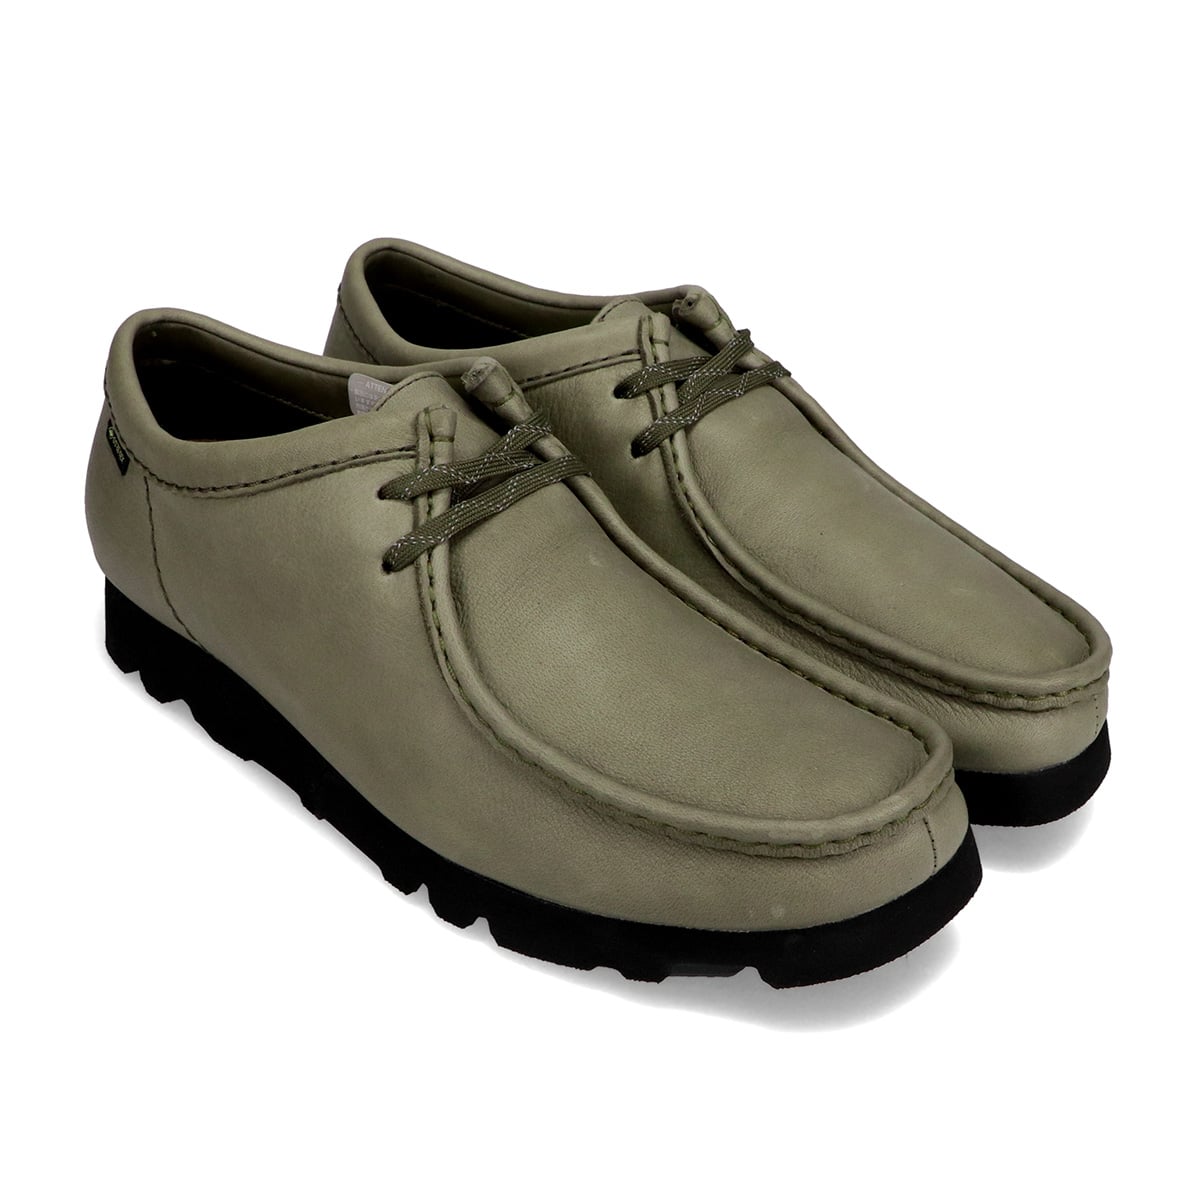 Clarks Wallabee GTX Olive Leather Olive Leather